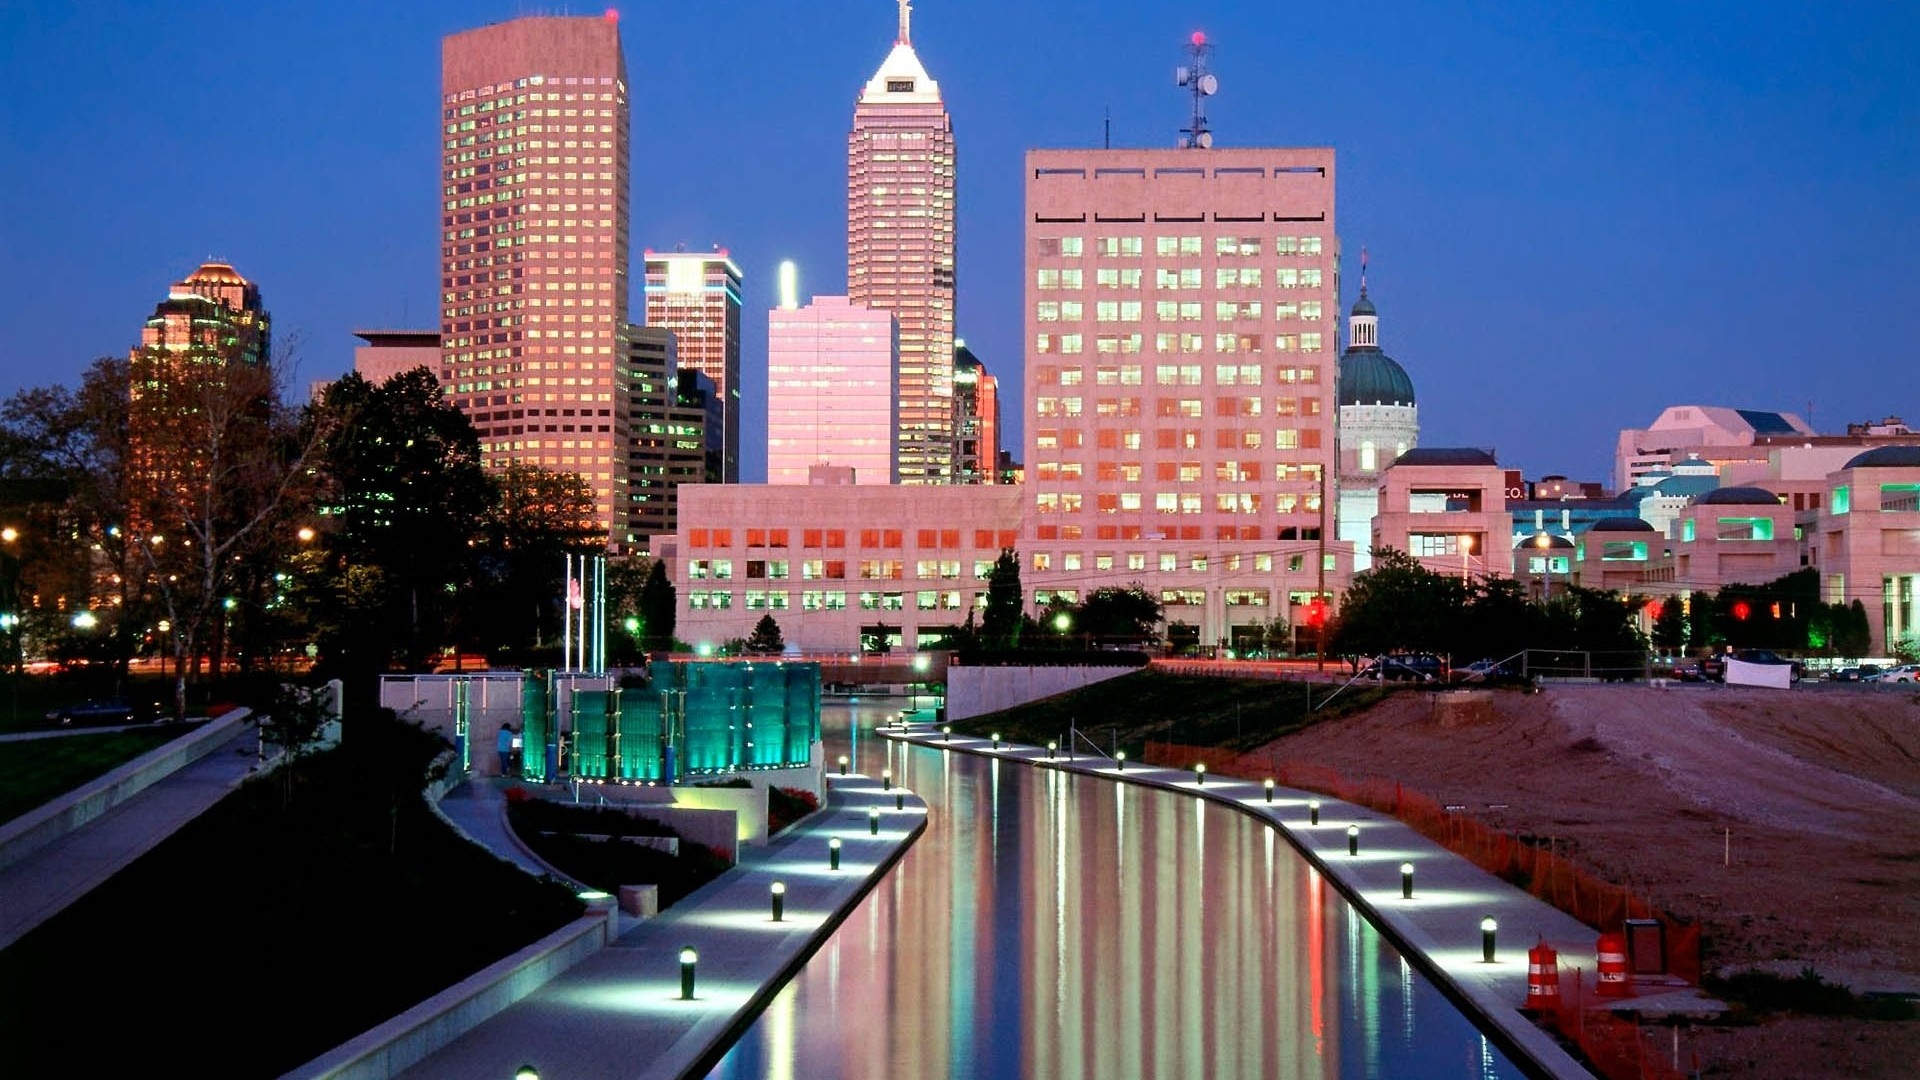 man made, indianapolis, cities